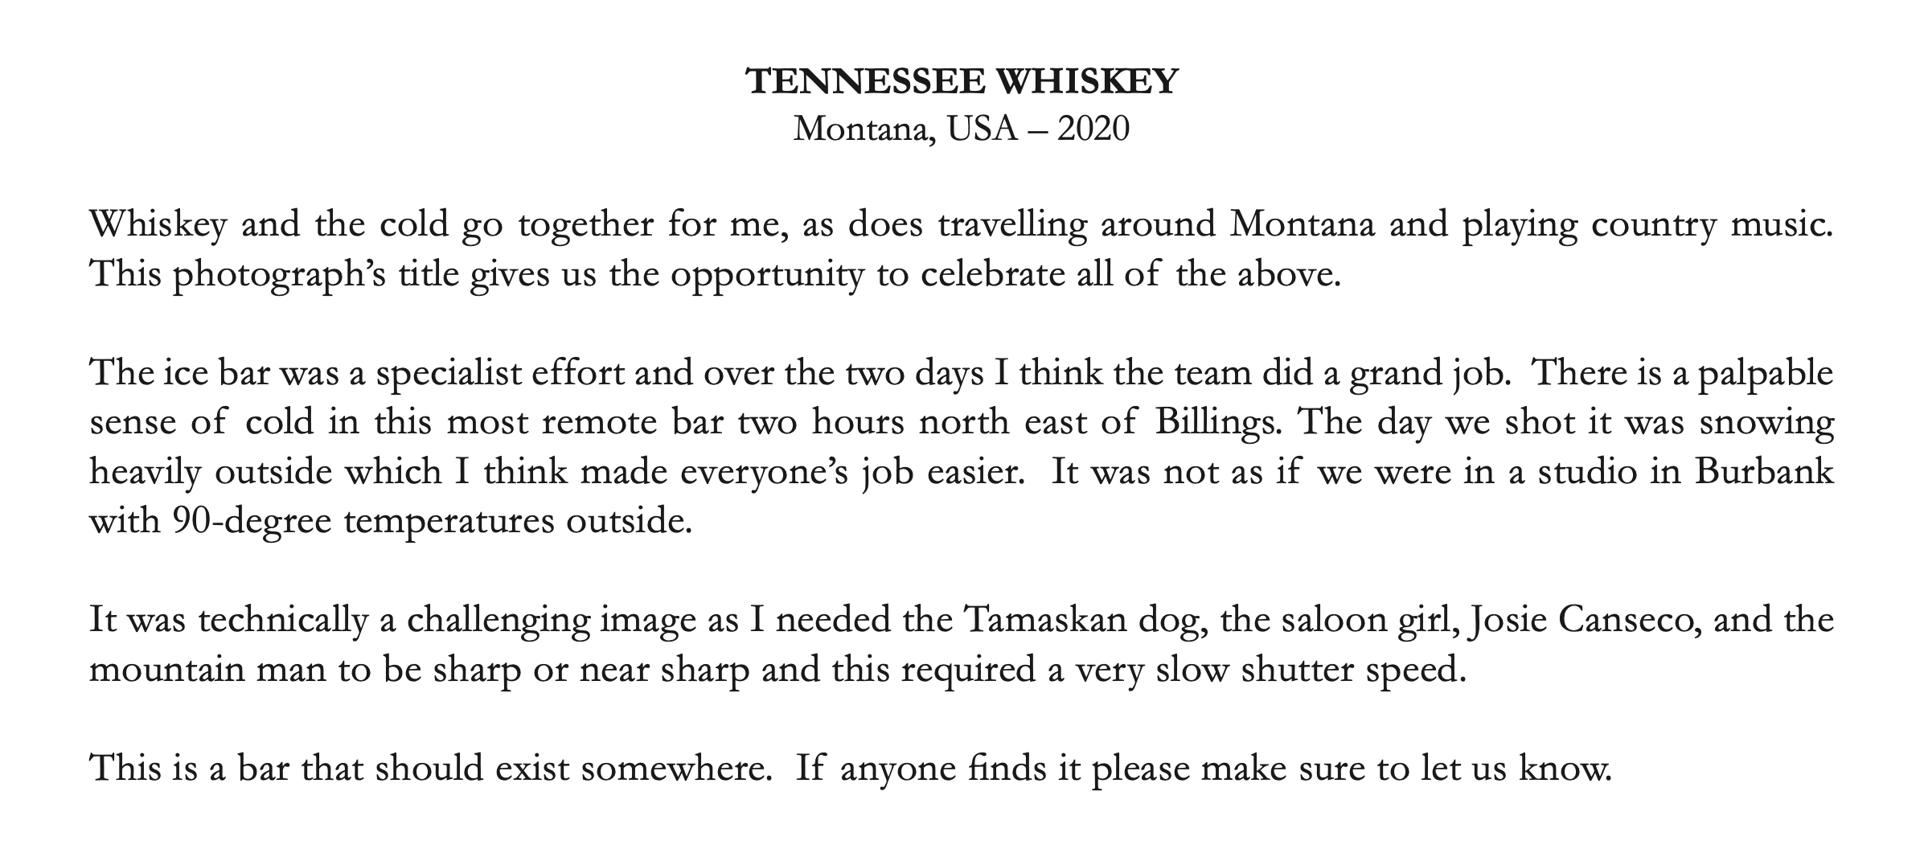 Tennessee Whiskey by David Yarrow